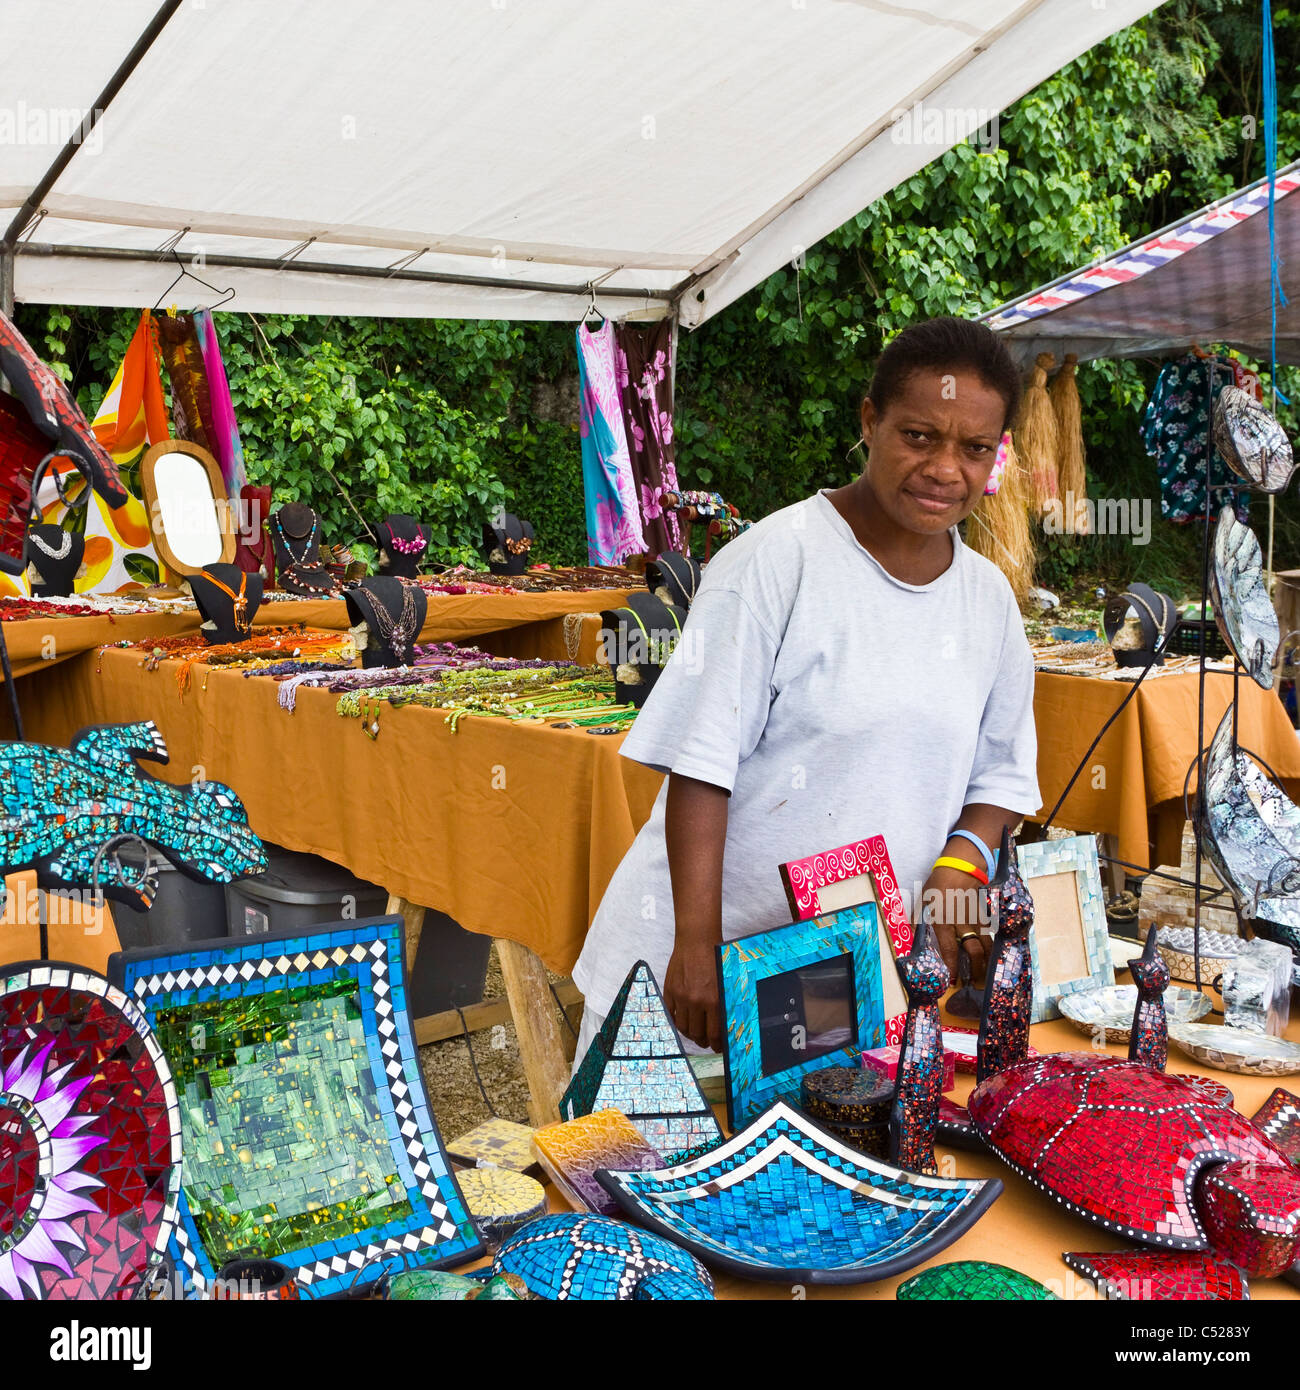 Female market stall holder selling decorative and traditional craft goods Stock Photo